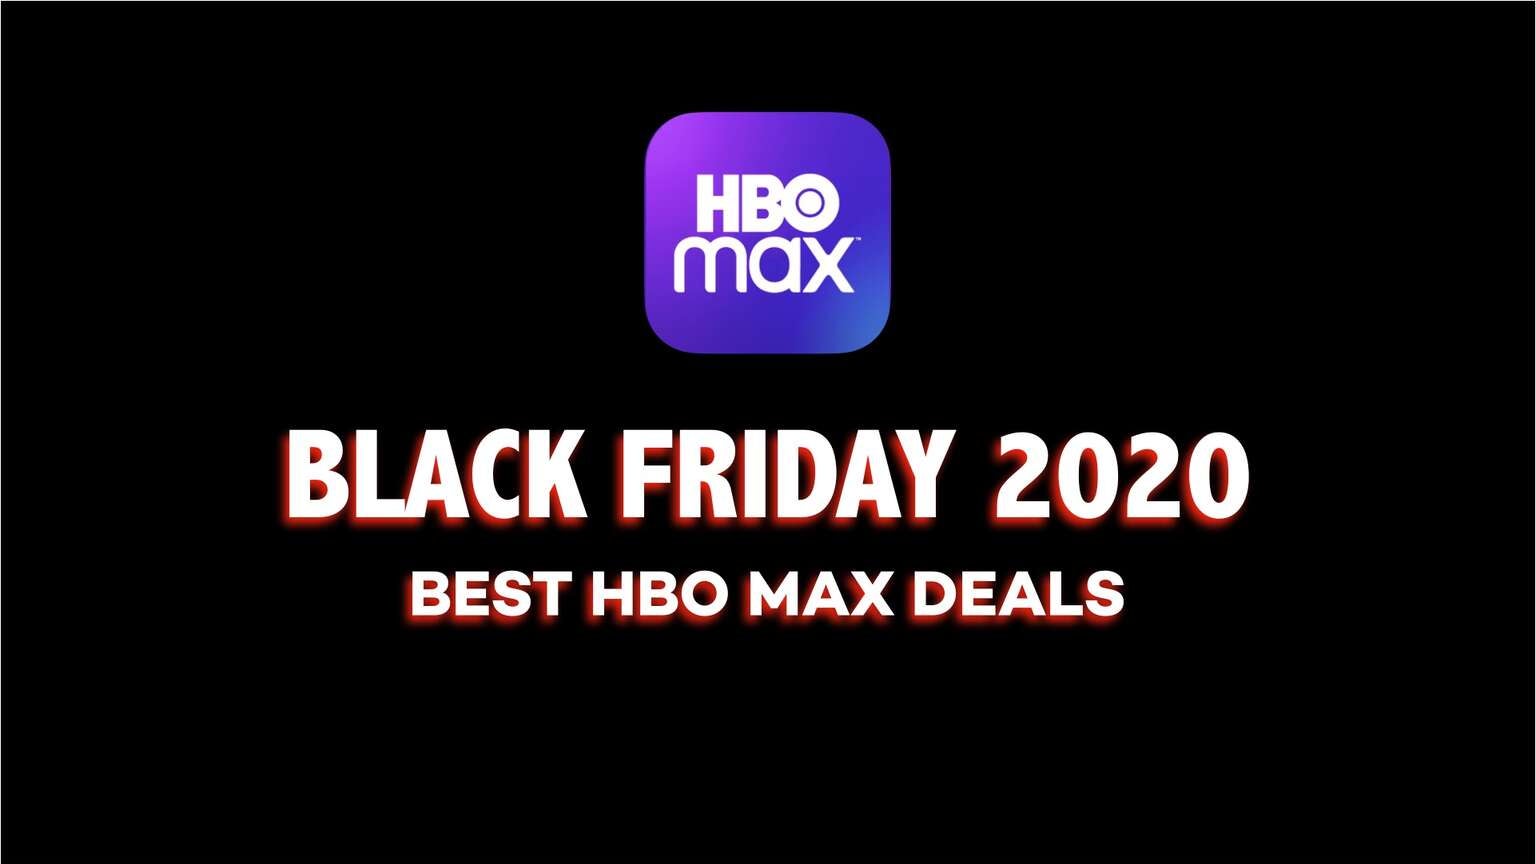 HBO Max Black Friday 2020 Deals: What Are the Best Ways to Save on HBO Max  on Black Friday & Cyber Monday? – The Streamable